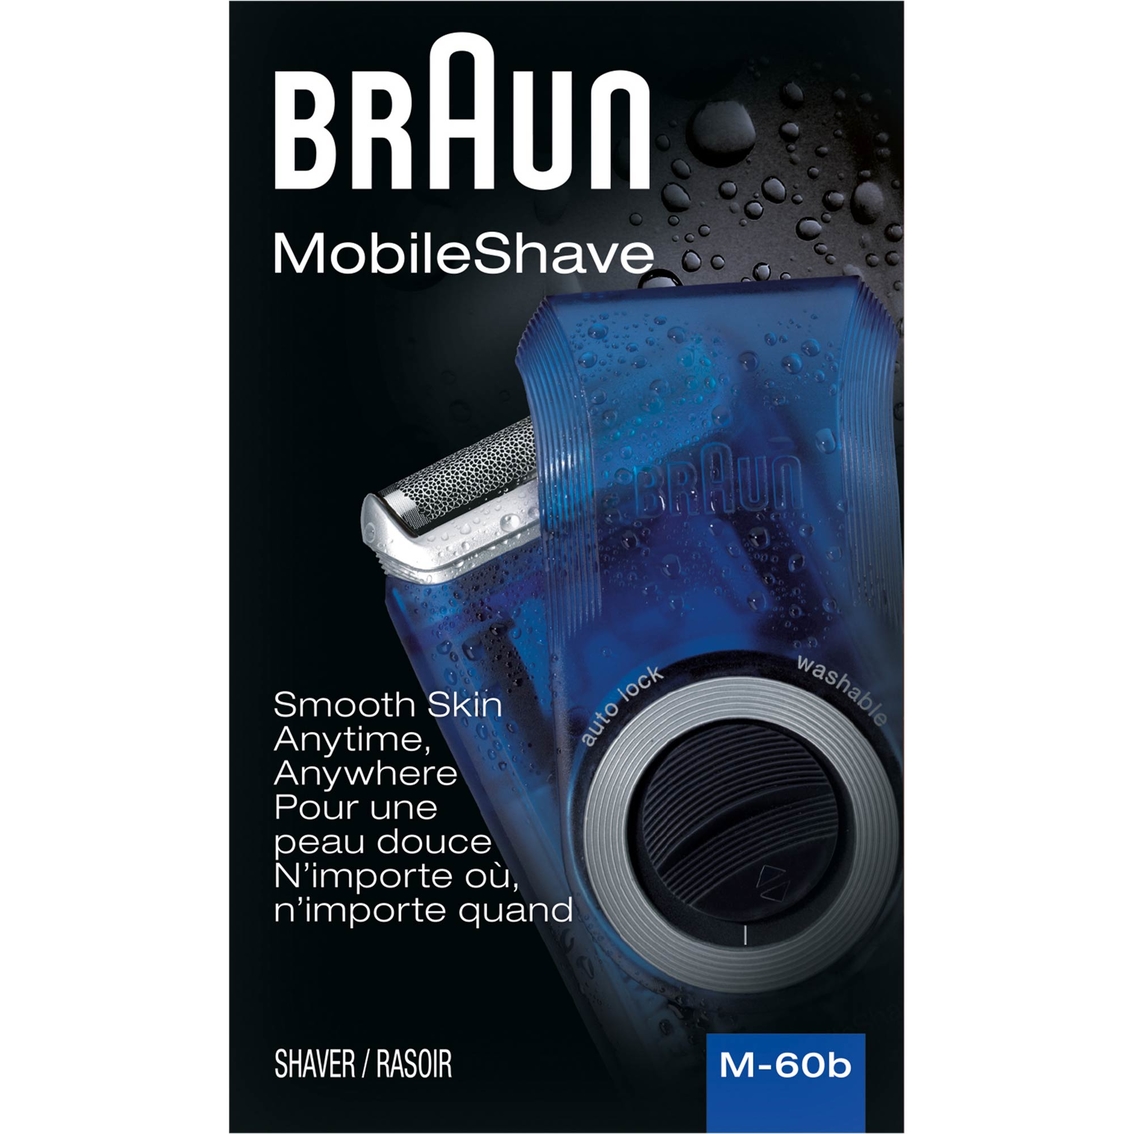 Braun M60B Mobile Shave Shaver - Image 2 of 2